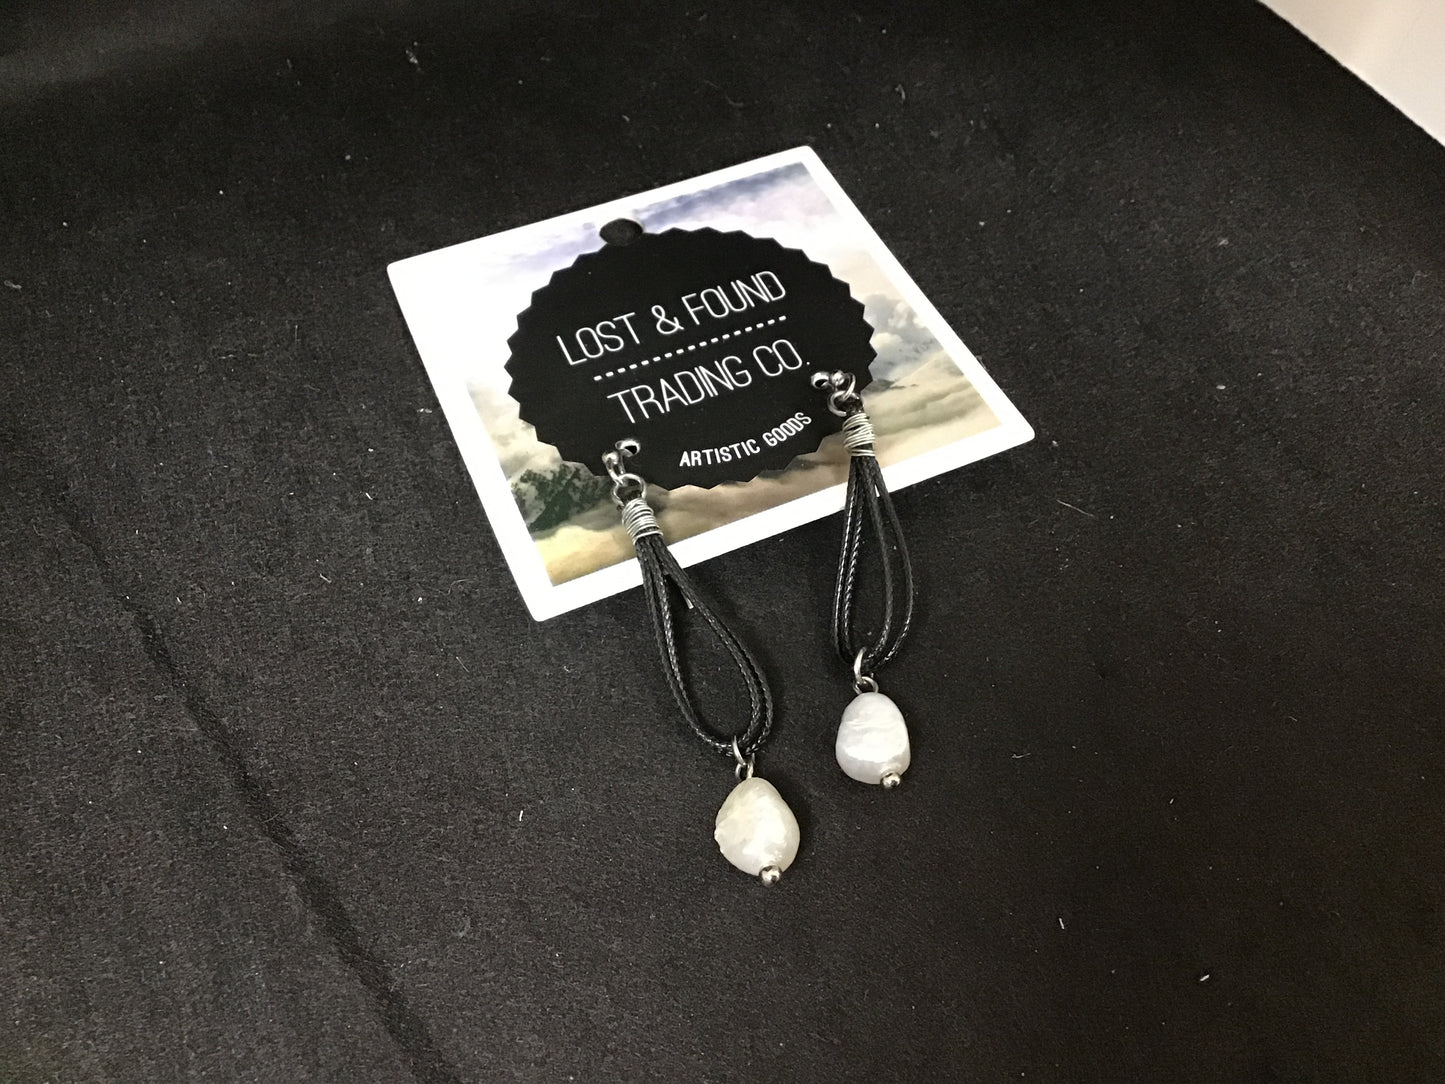 Lost & Found Assorted Earrings